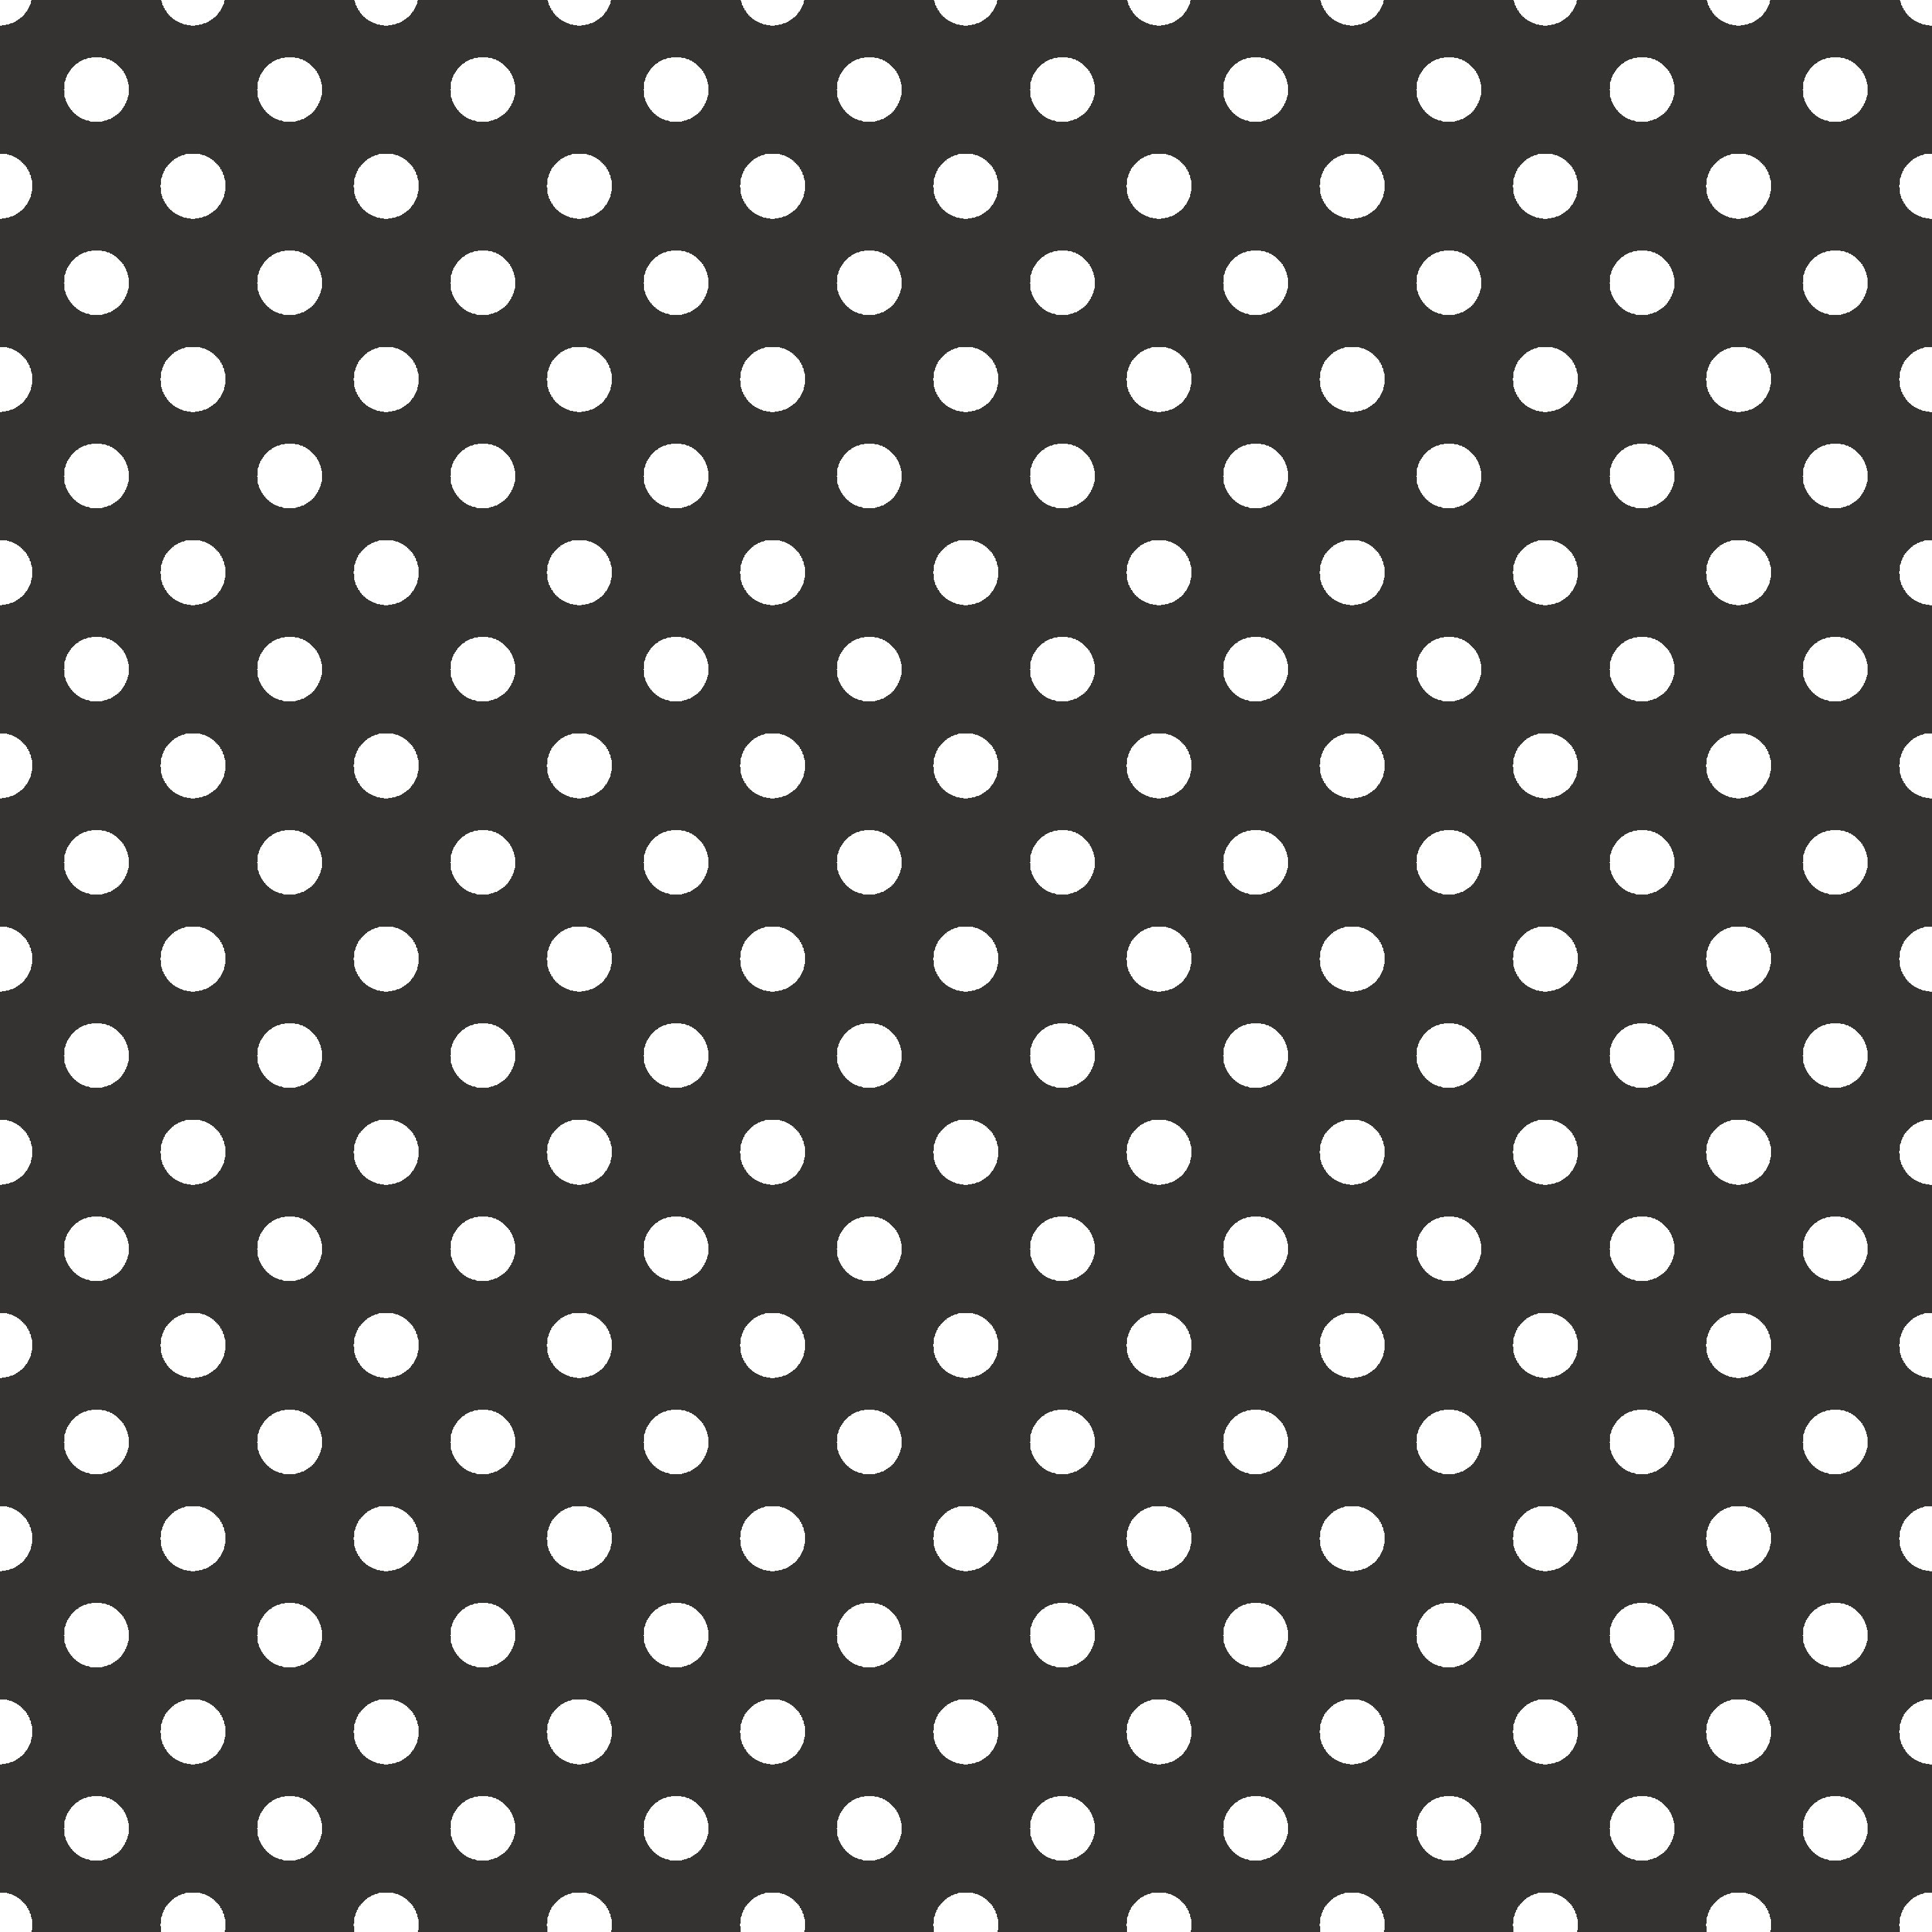 Waverly Inspirations Cotton 44" Big Dots Black Color Sewing Fabric by the Yard